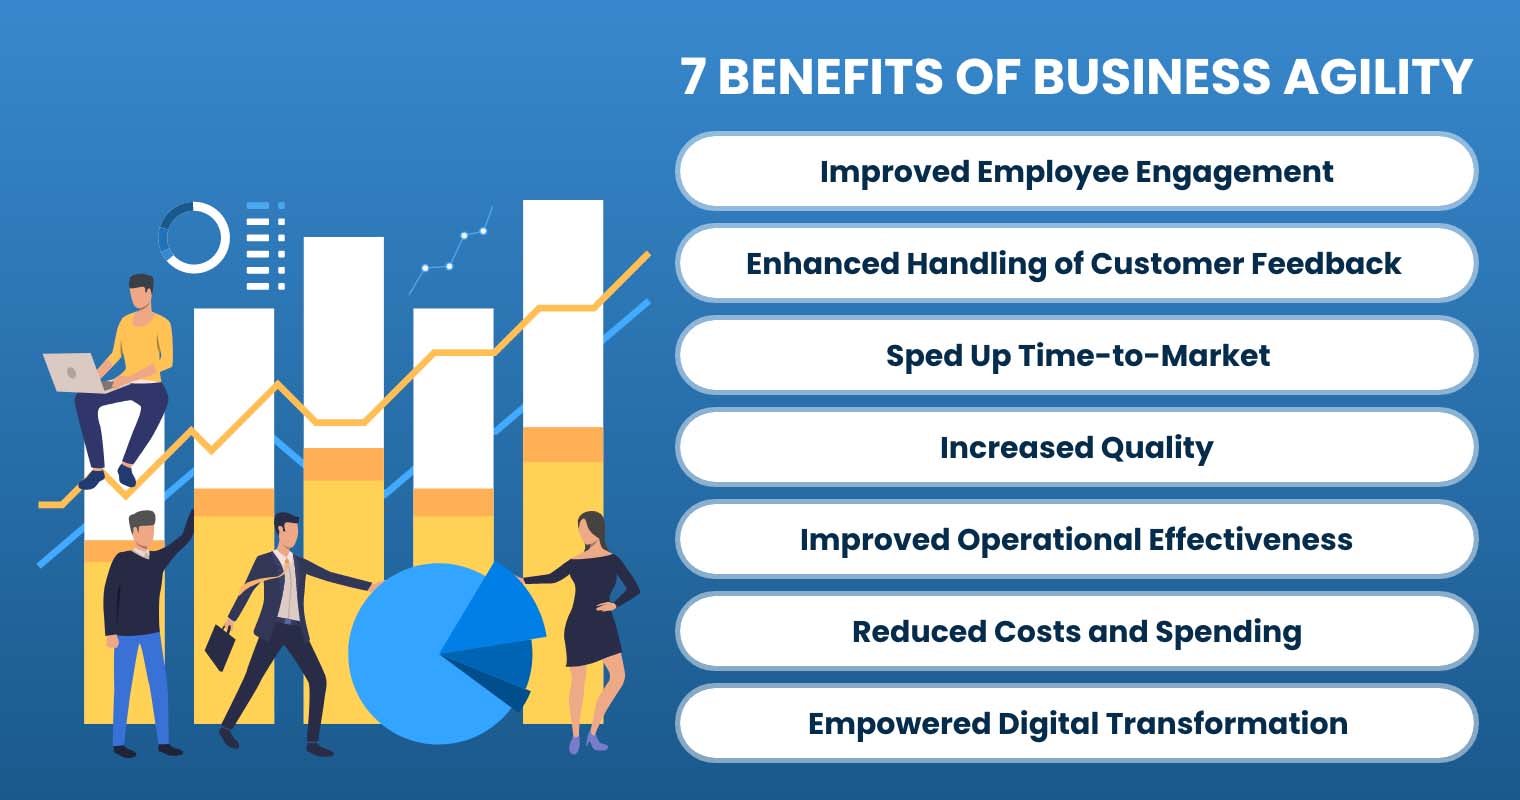 Benefits of Business Agility